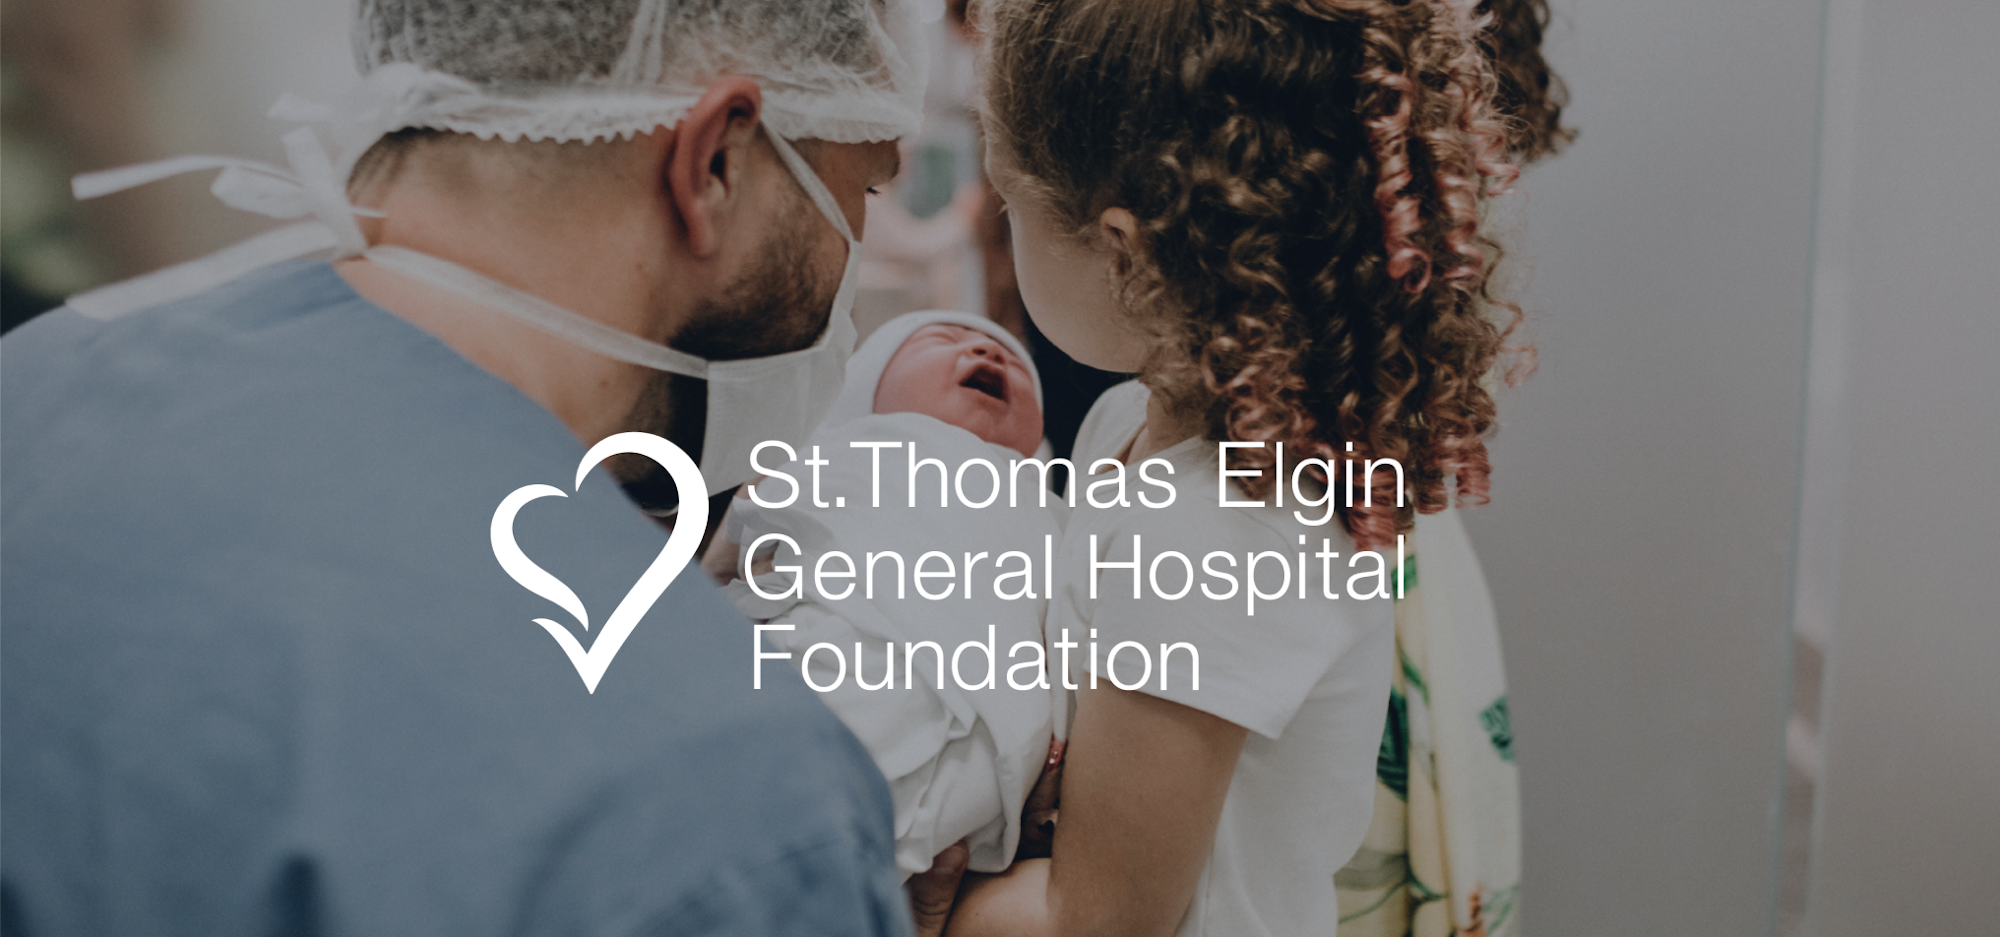 little girl and dad holding newborn baby in the hospital. St. Thomas Elgin General Hospital Foundation logo overlayed.